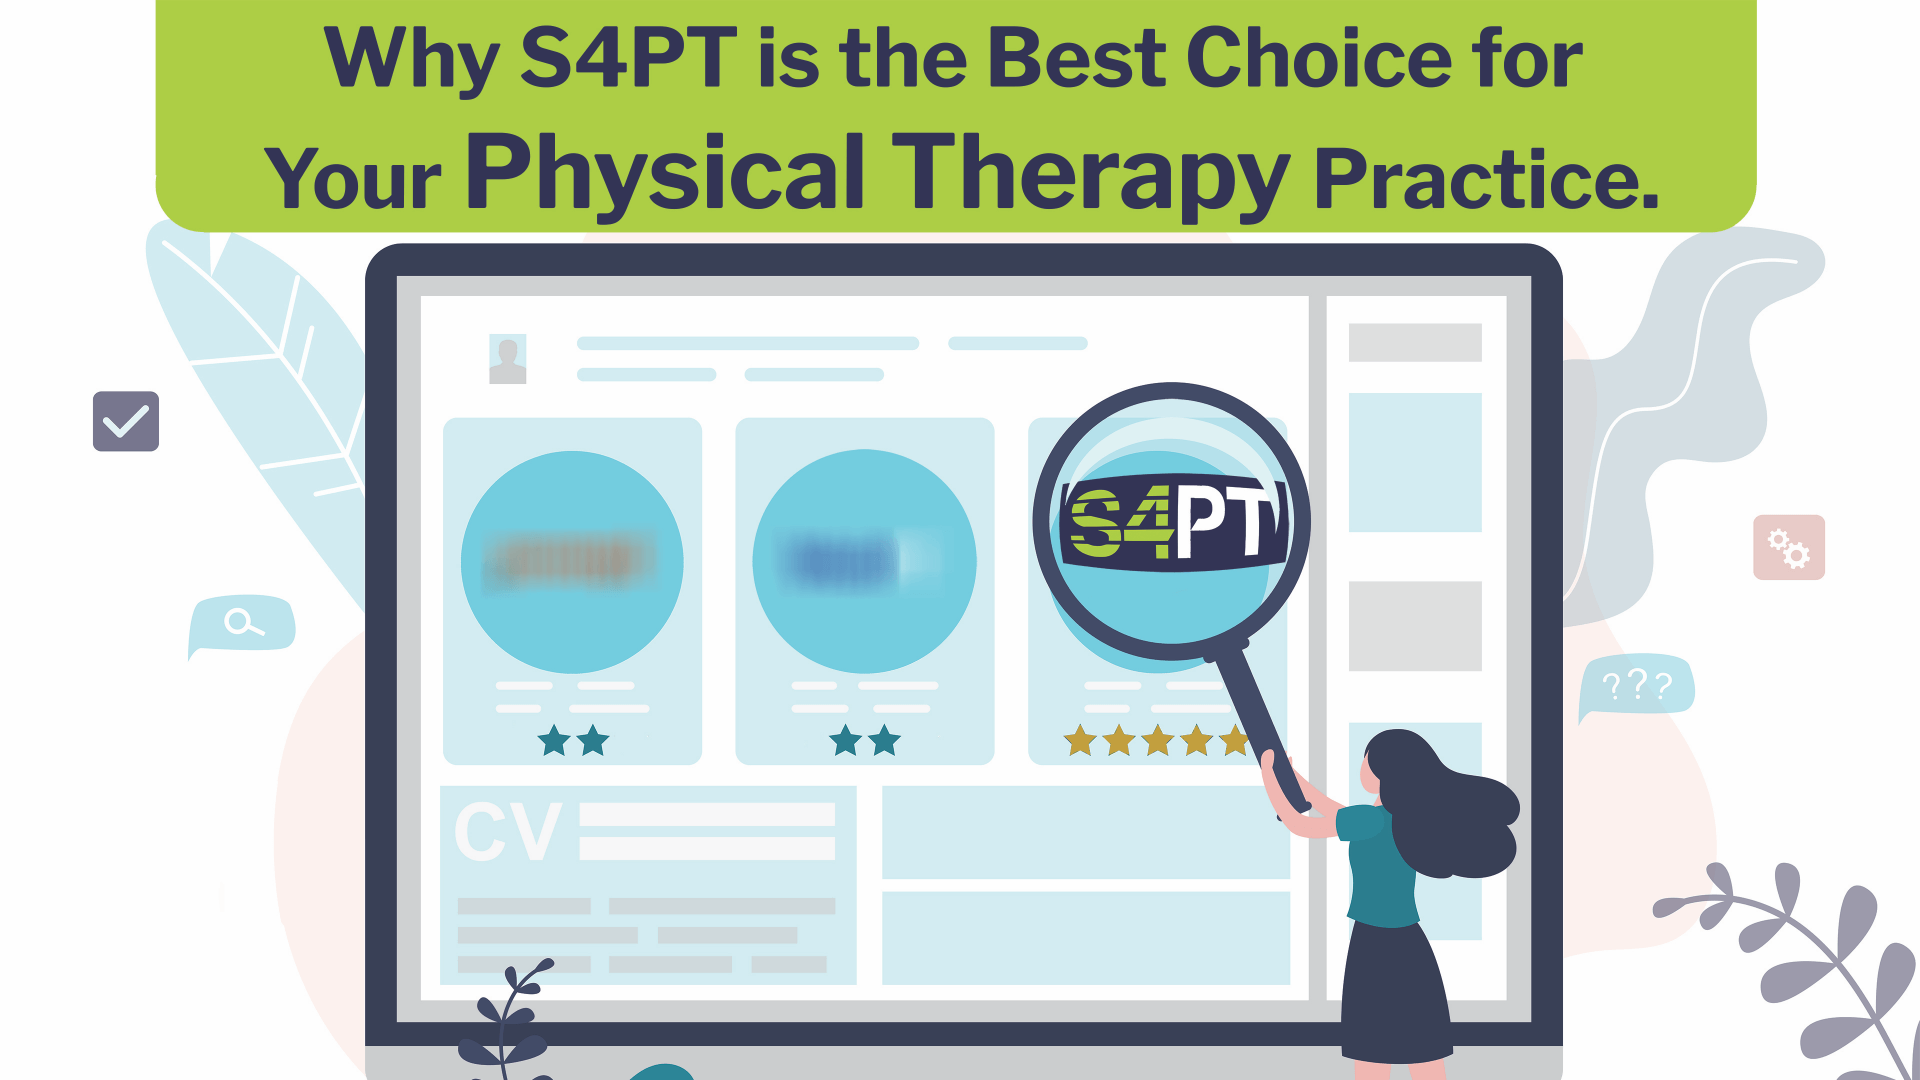 Systems4PT is the best choice for your physical therapy clinic